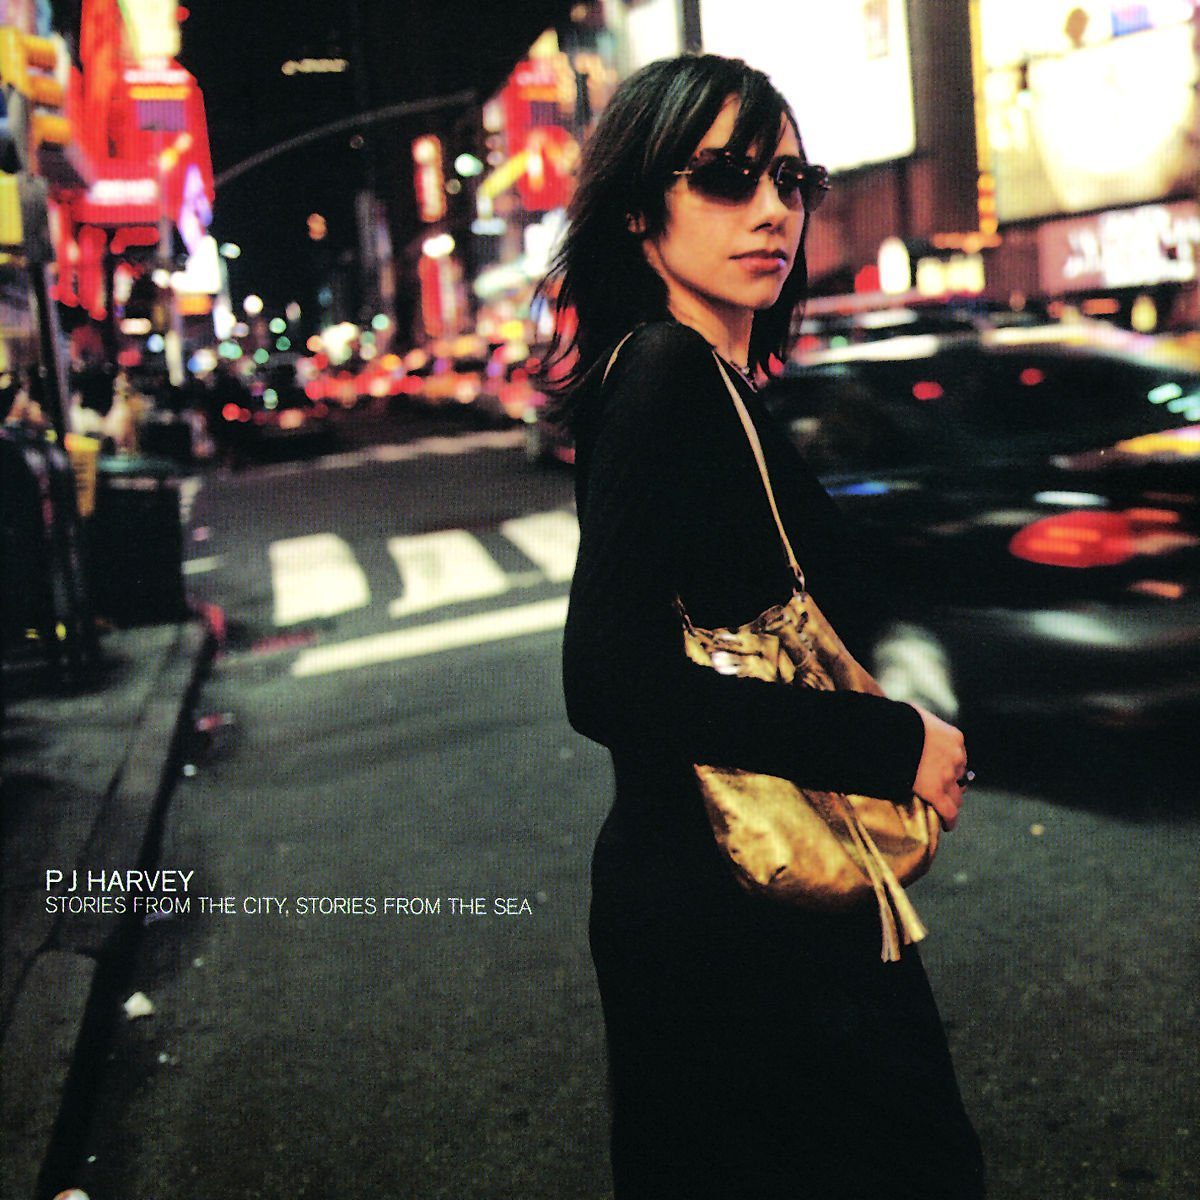 PJ Harvey - Stories from the City | The Rumpus